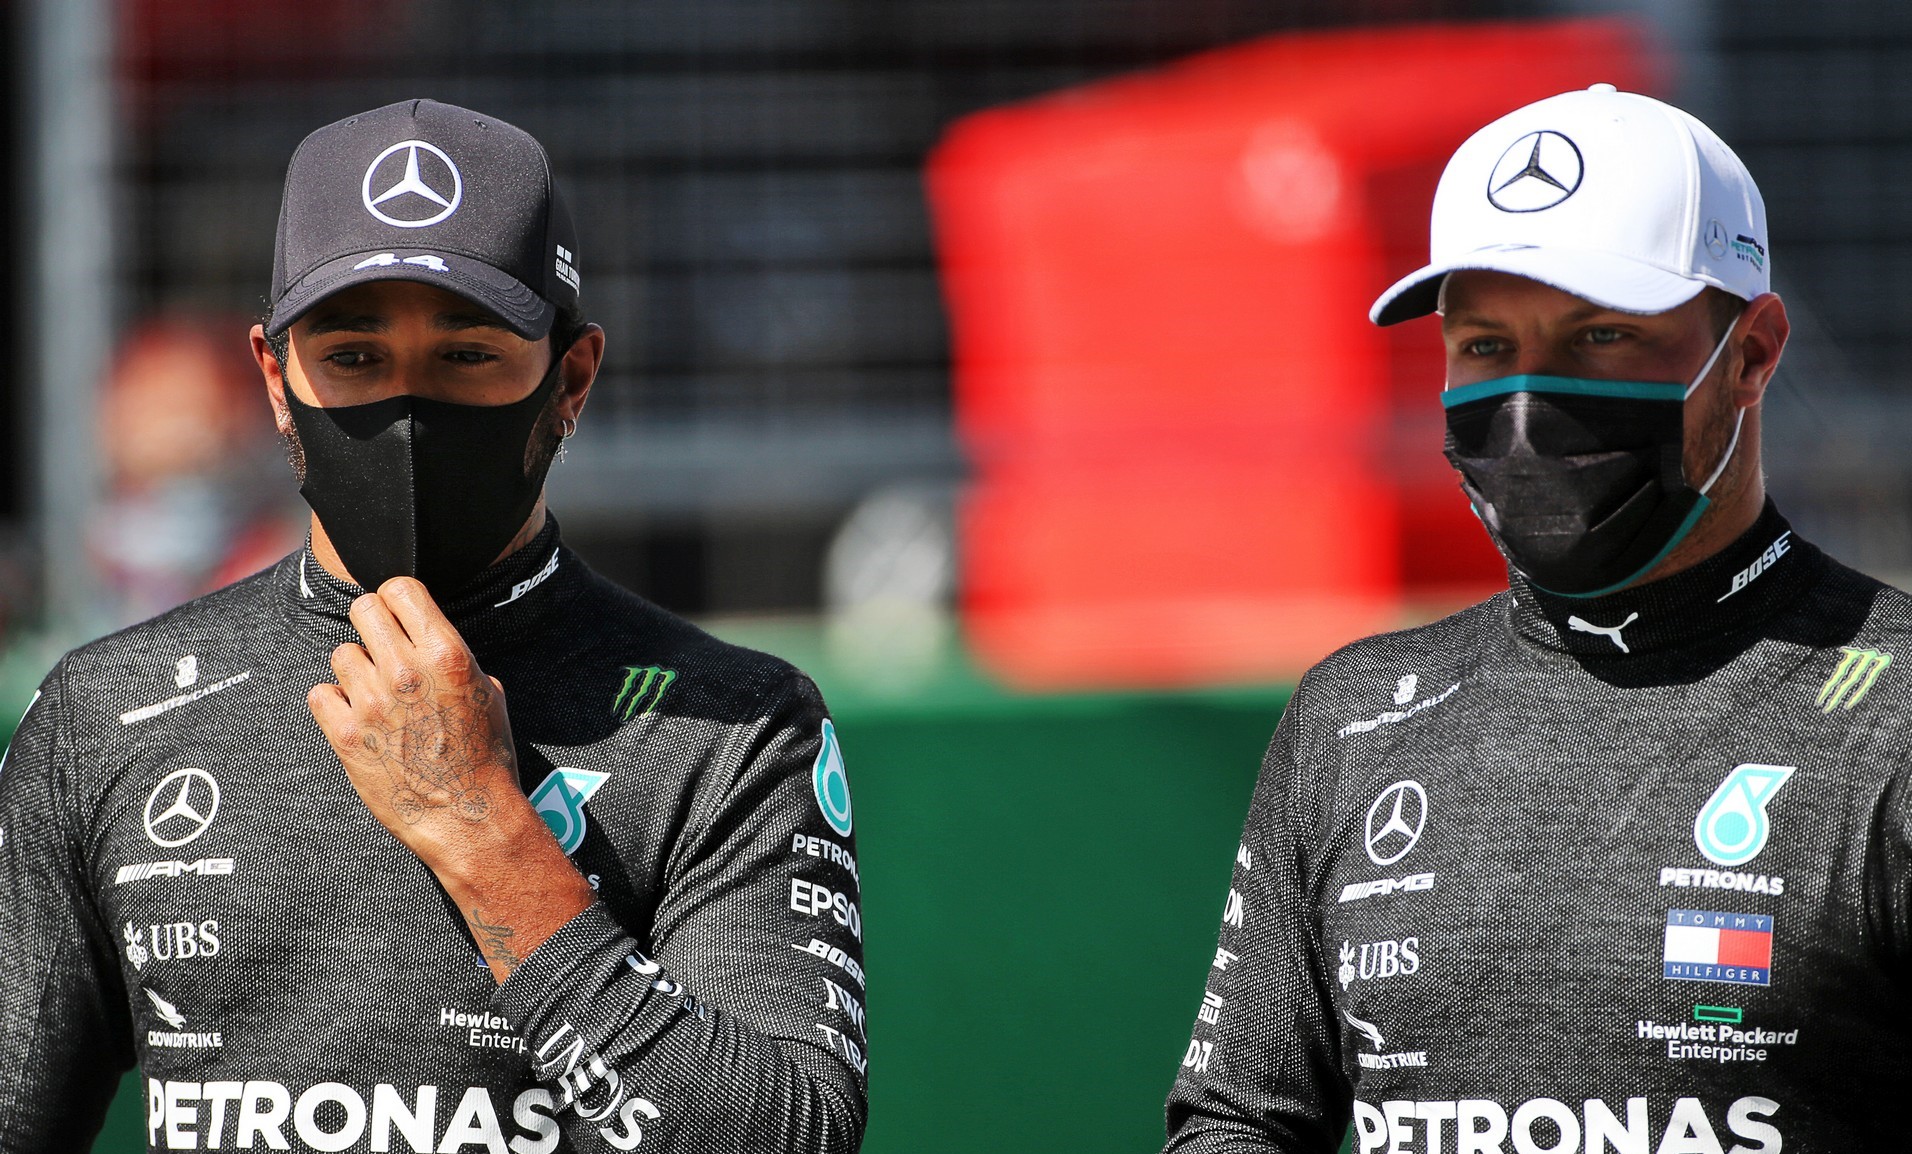 Mercedes wants Hamilton to have a weak team-mate so he can dominate